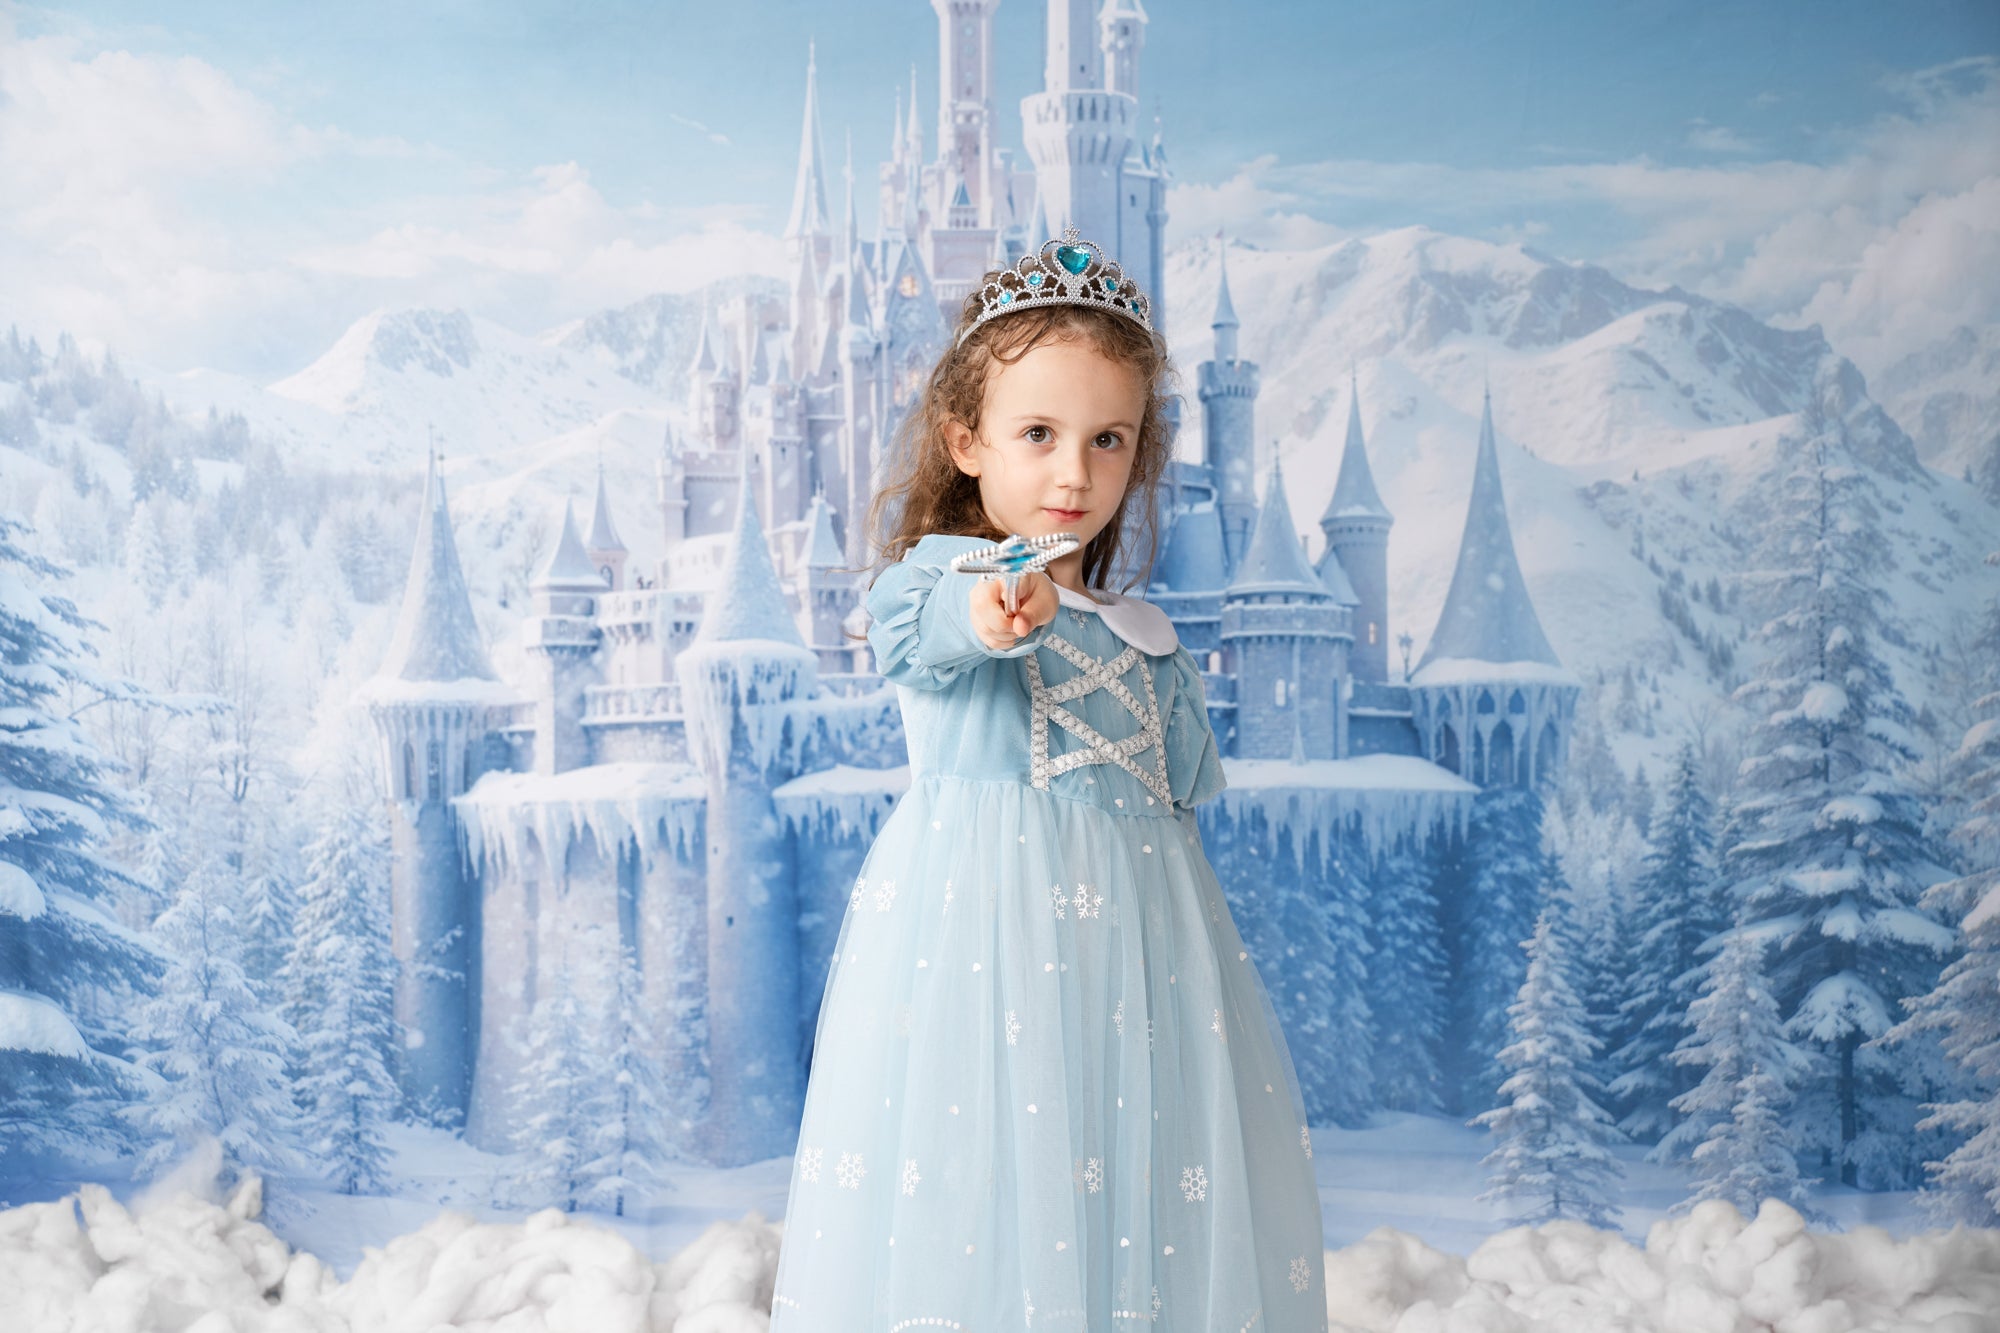 Kate Winter Ice Frosted World Castle Backdrop Designed by Chain Photography